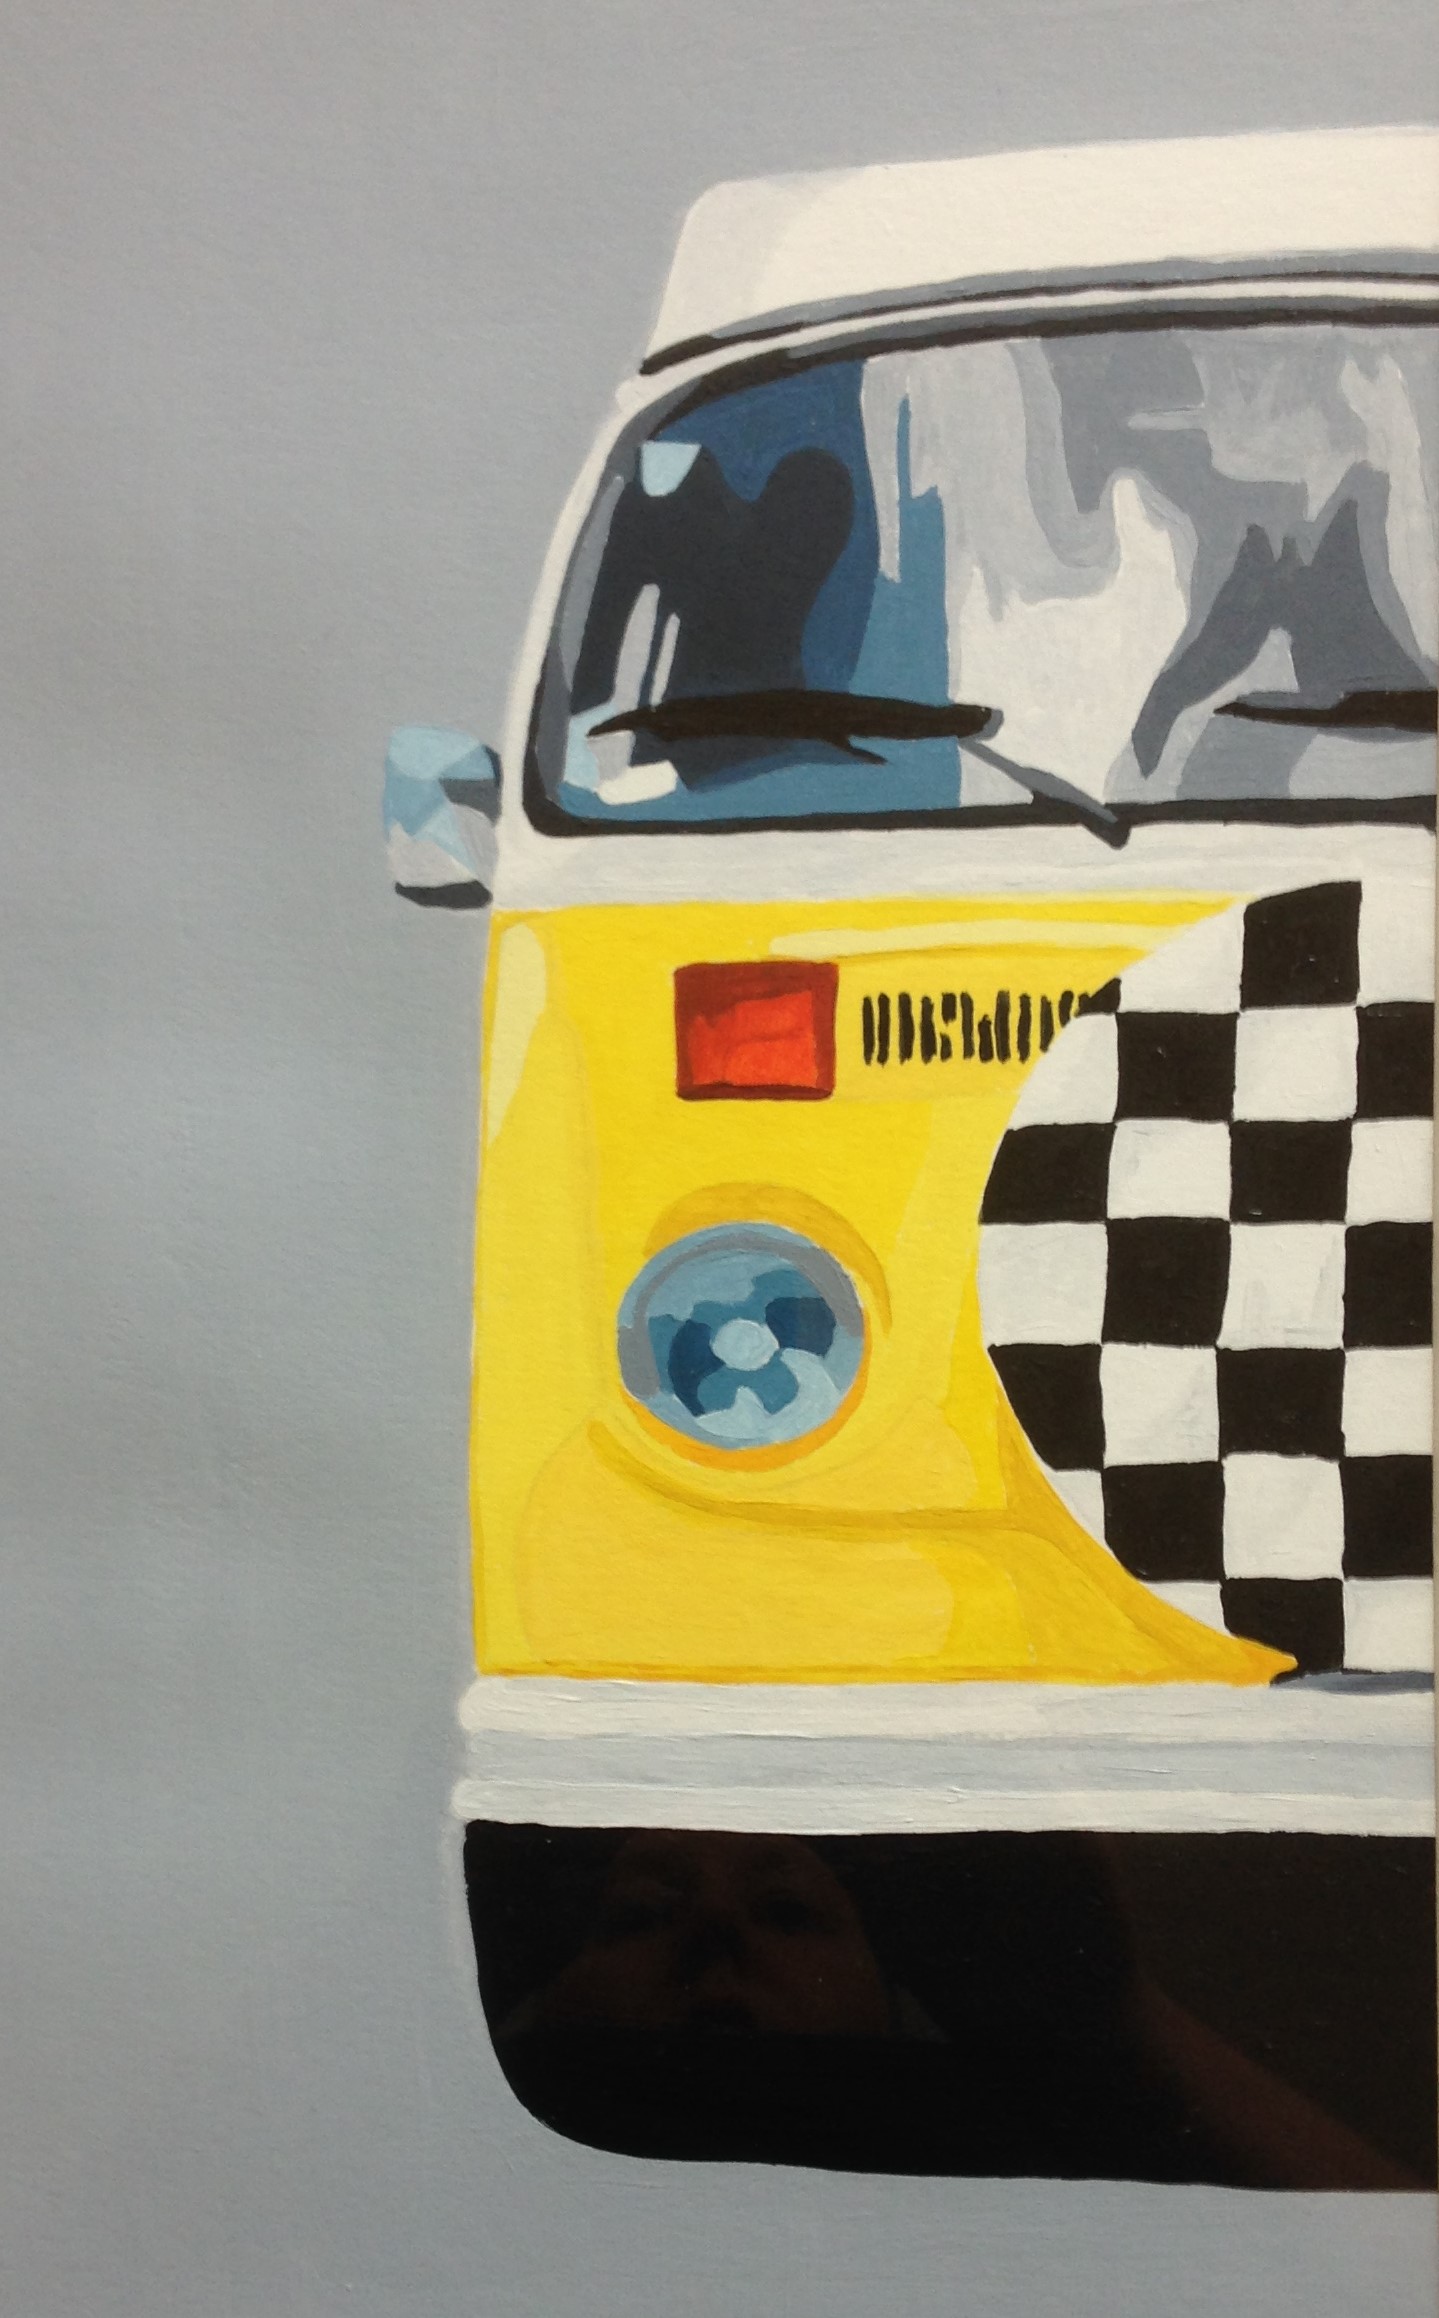 VW Bay window campervan acrylic painting by Louisa Hill